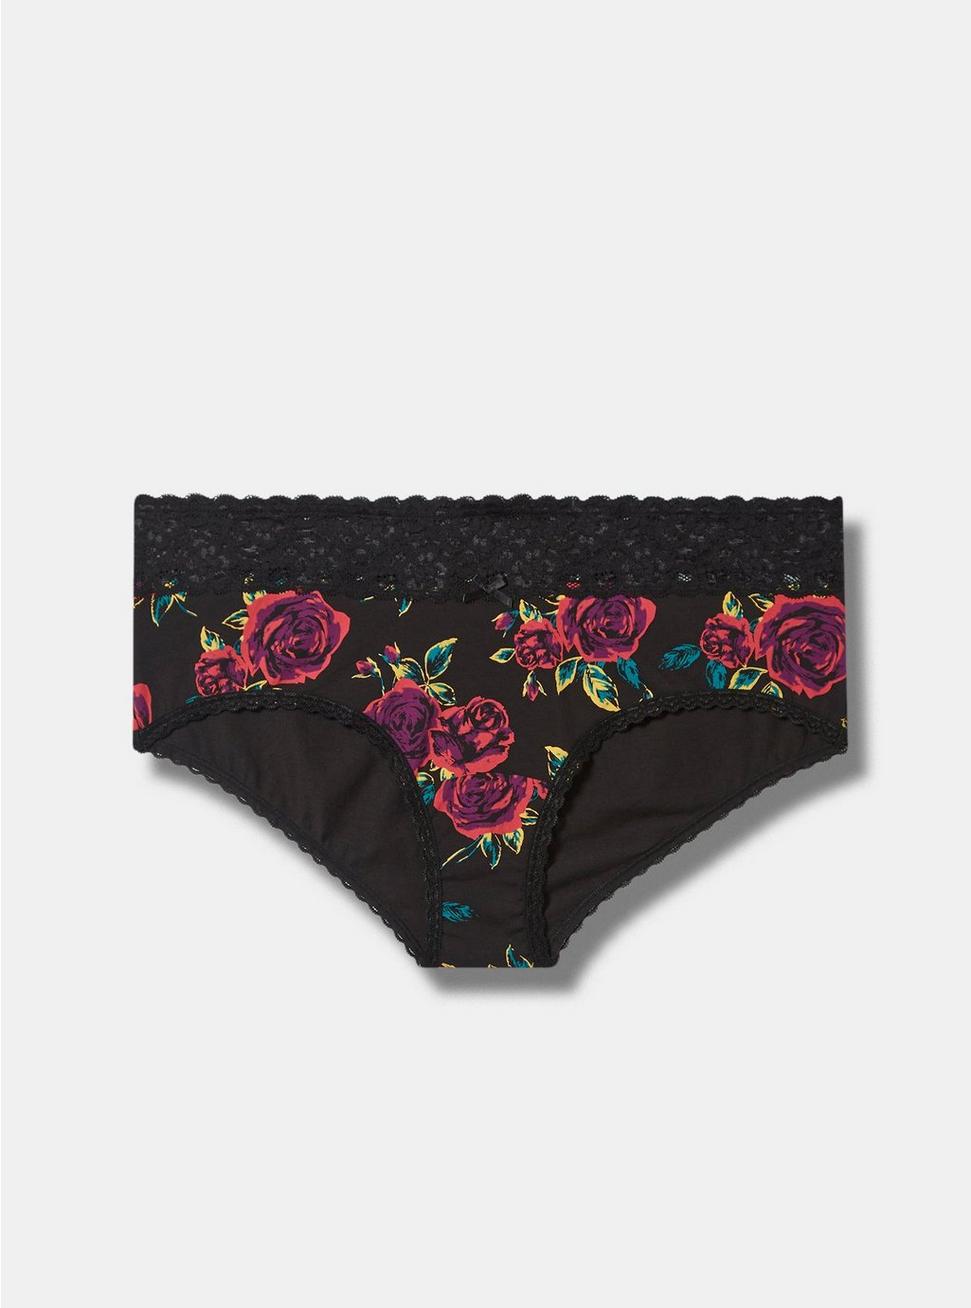 Cotton Mid-Rise Cheeky Lace Trim Panty, BRUSHED ROSES FLORAL BLACK, hi-res